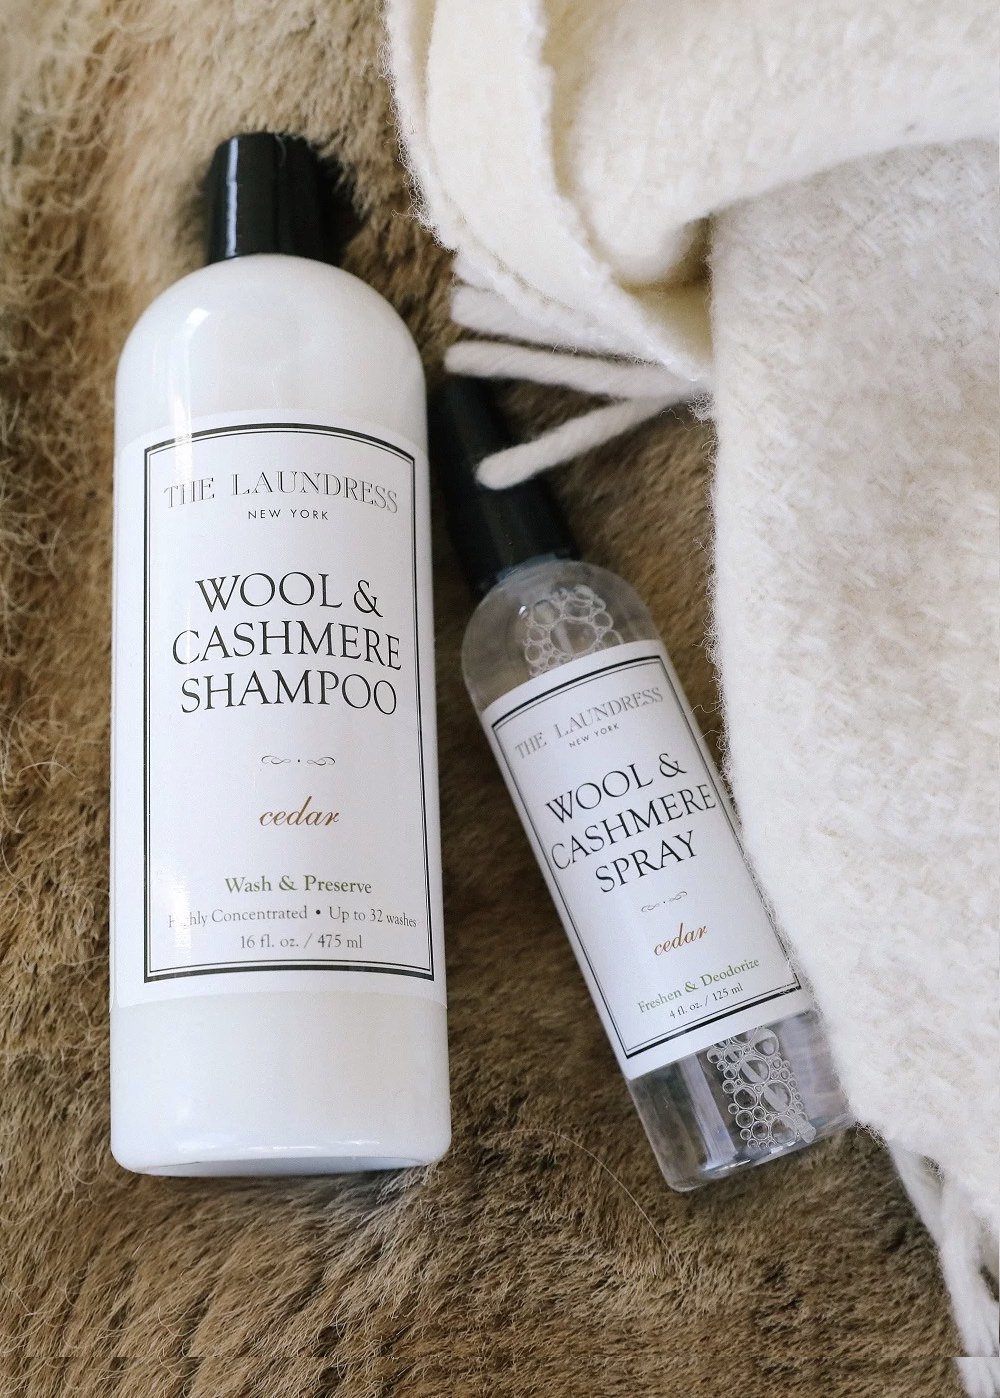 Wool & Cashmere Shampoo and Spray Duo